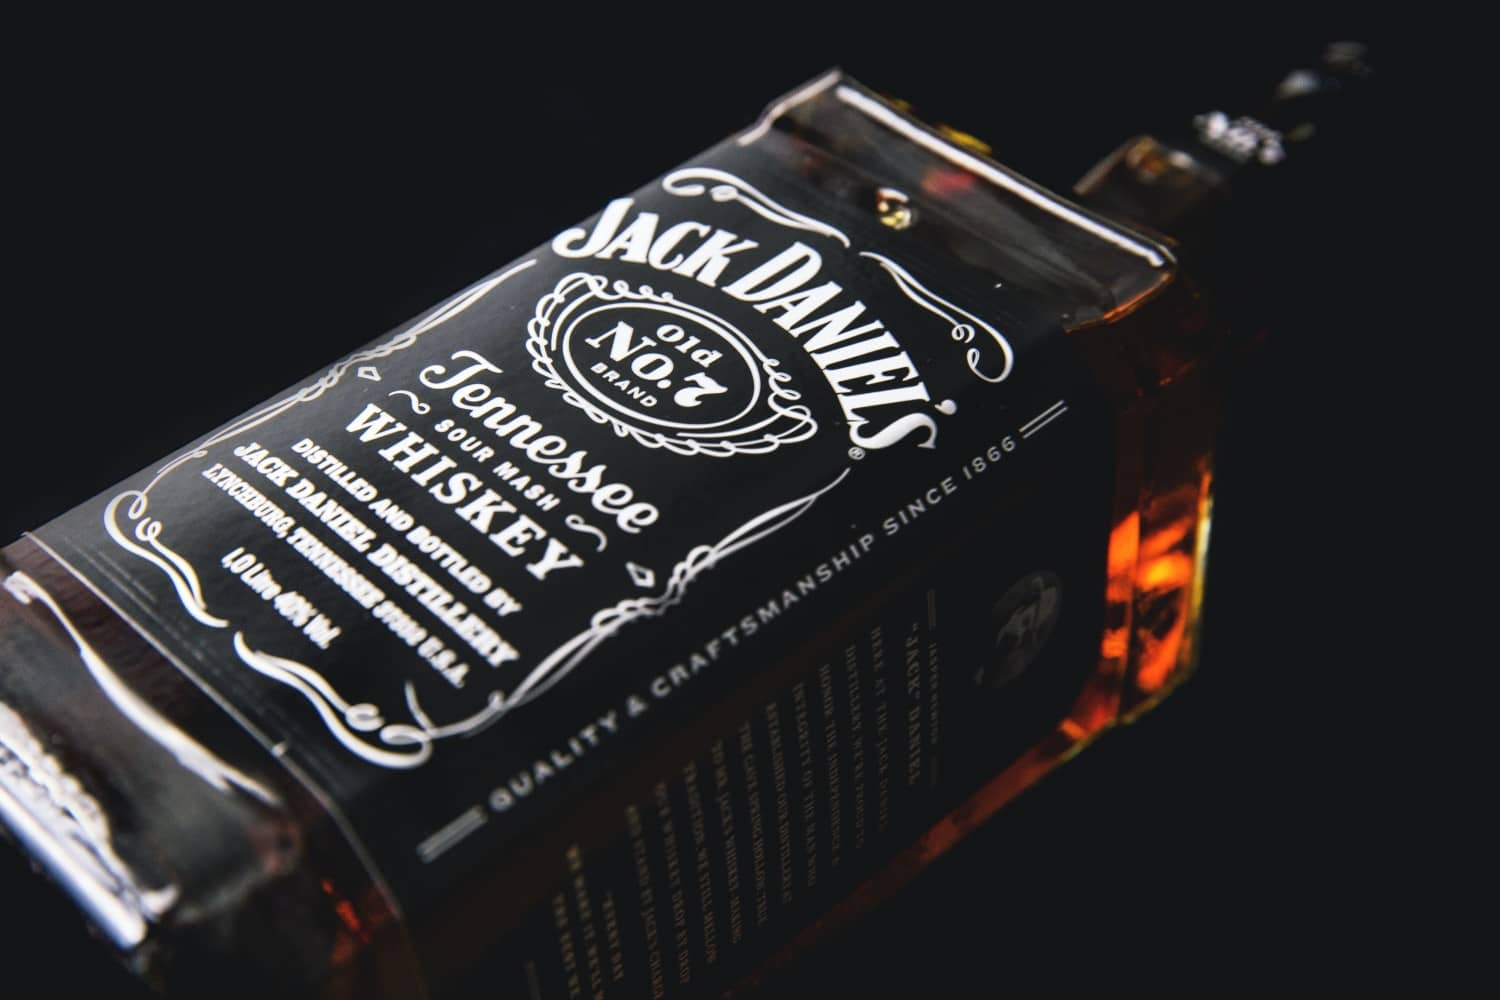 The future of jack daniel's whiskey lies on investment and innovation